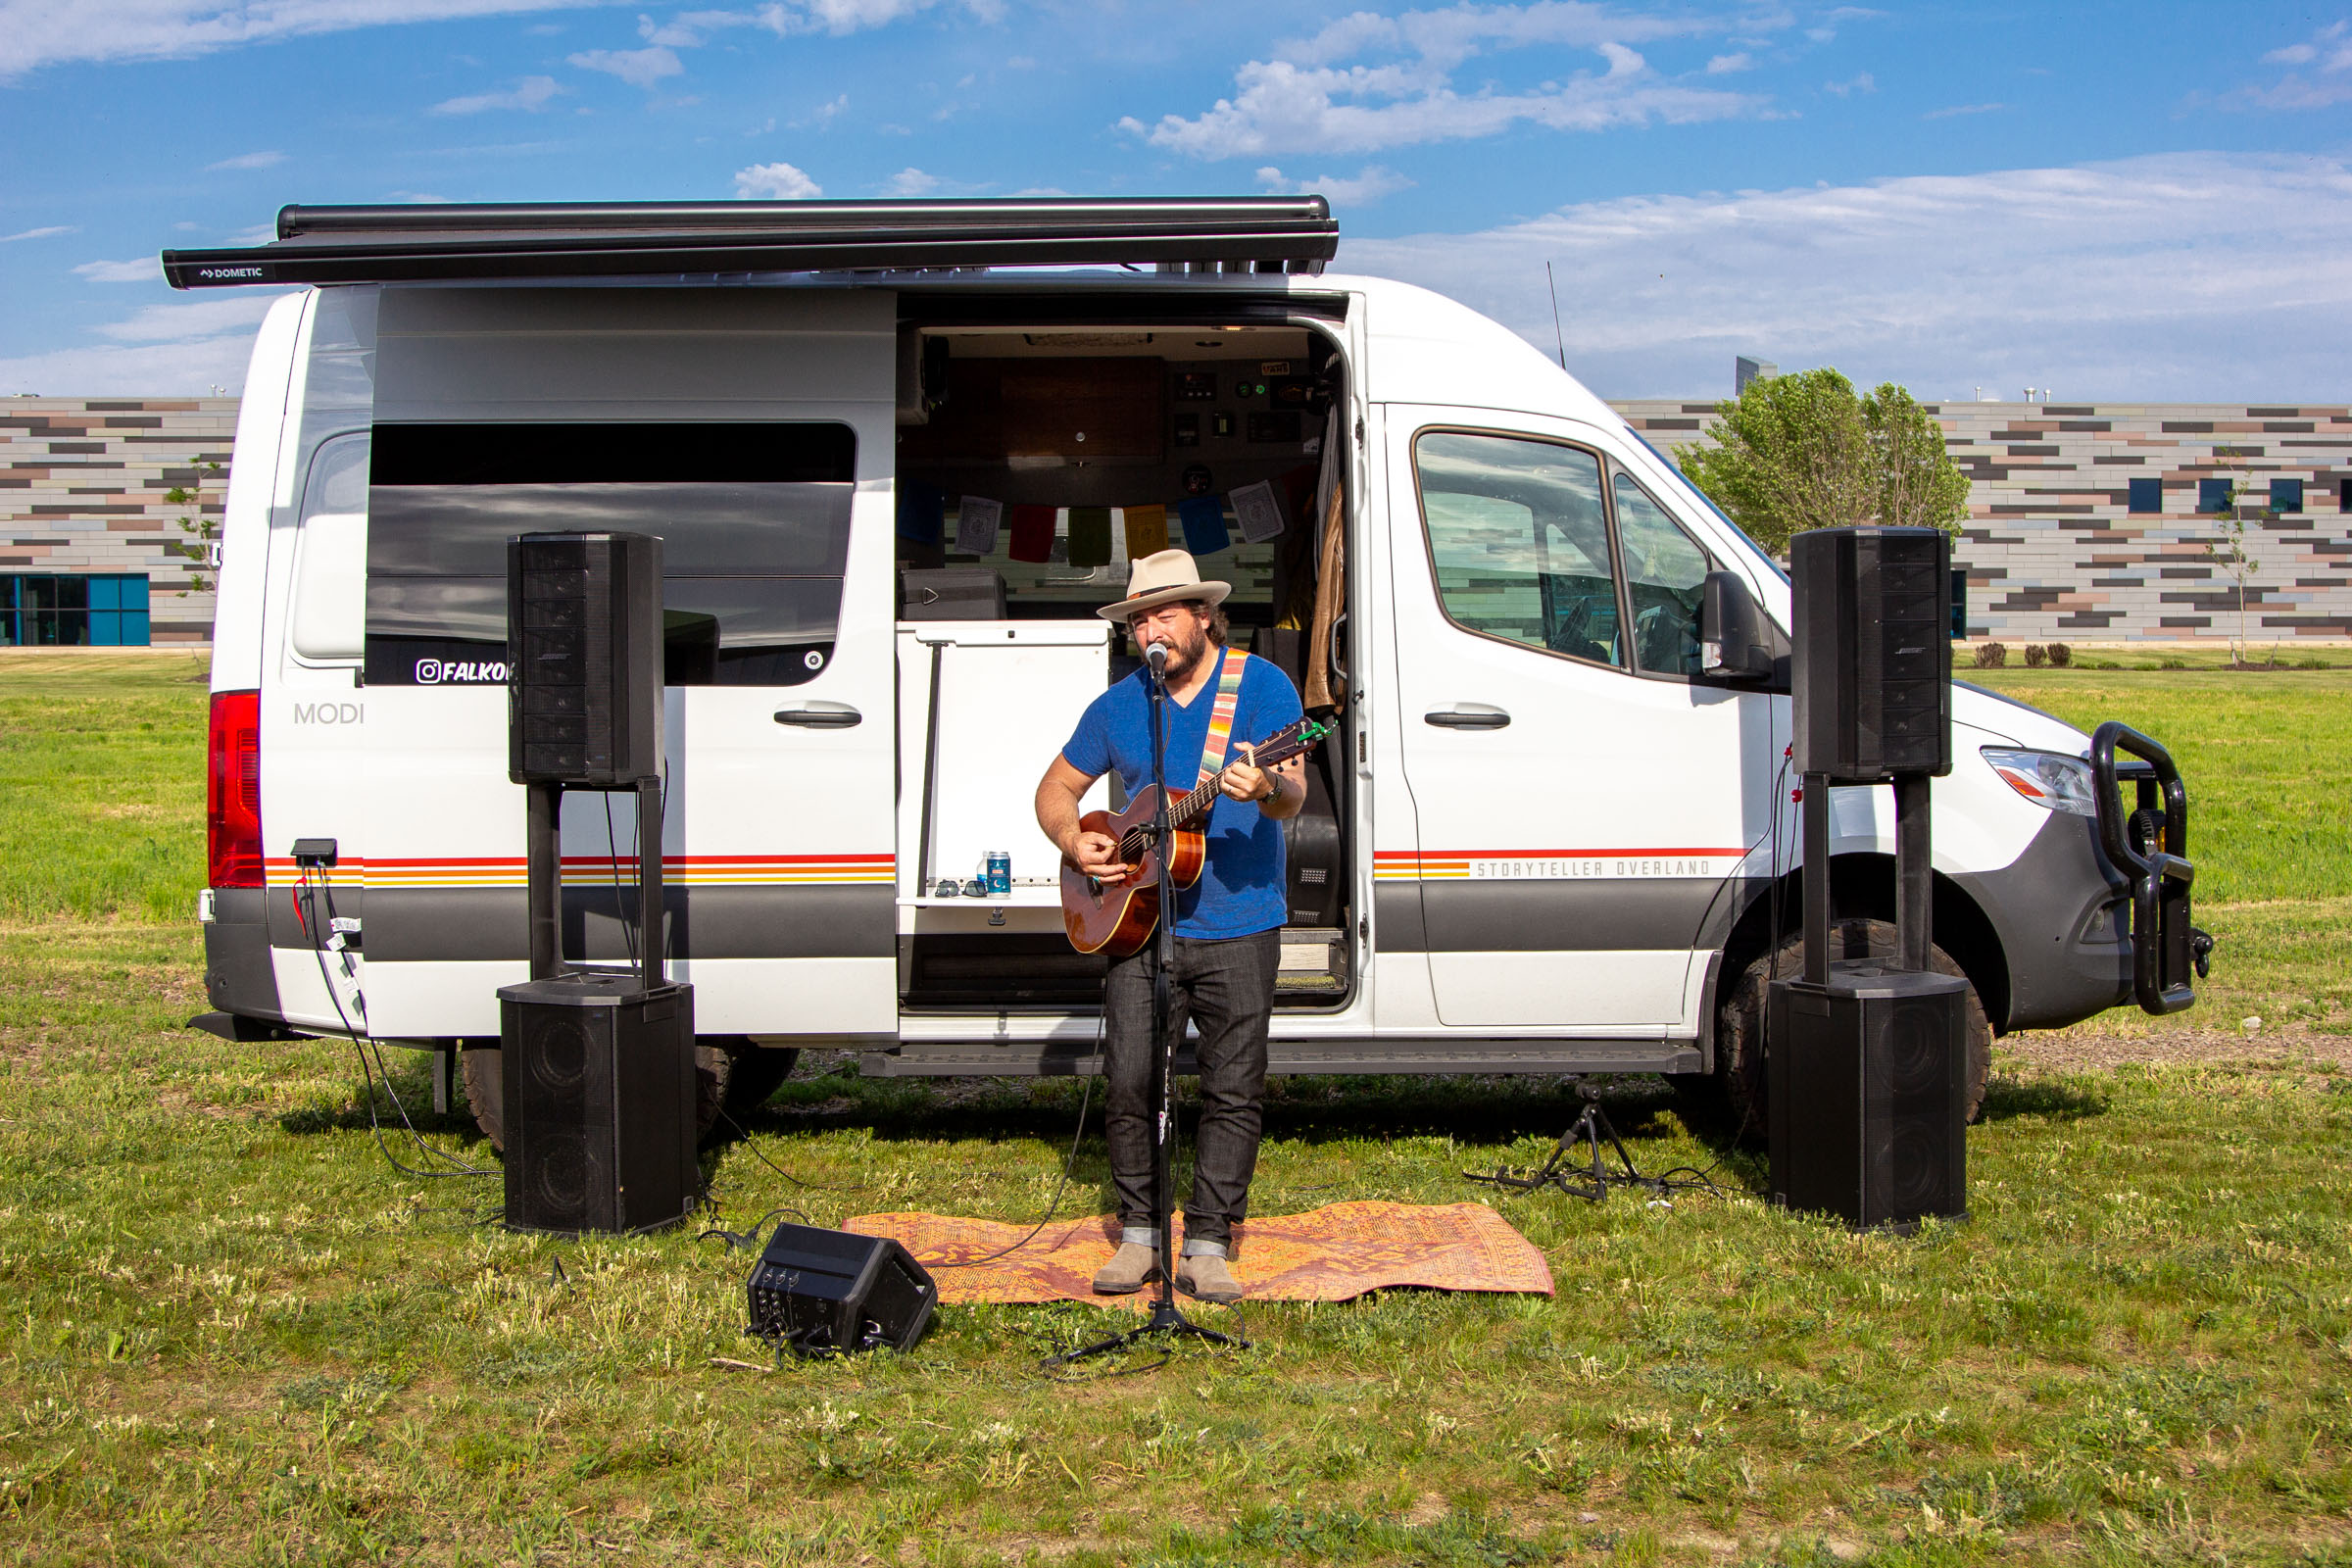 After hearing their story, Jack Johnson, CTO of Volta Power Systems, invited Jason and Emma to perform at the Volta Power Systems headquarters, with all audio equipment powered entirely off the Volta system in the Walsmiths’ van.